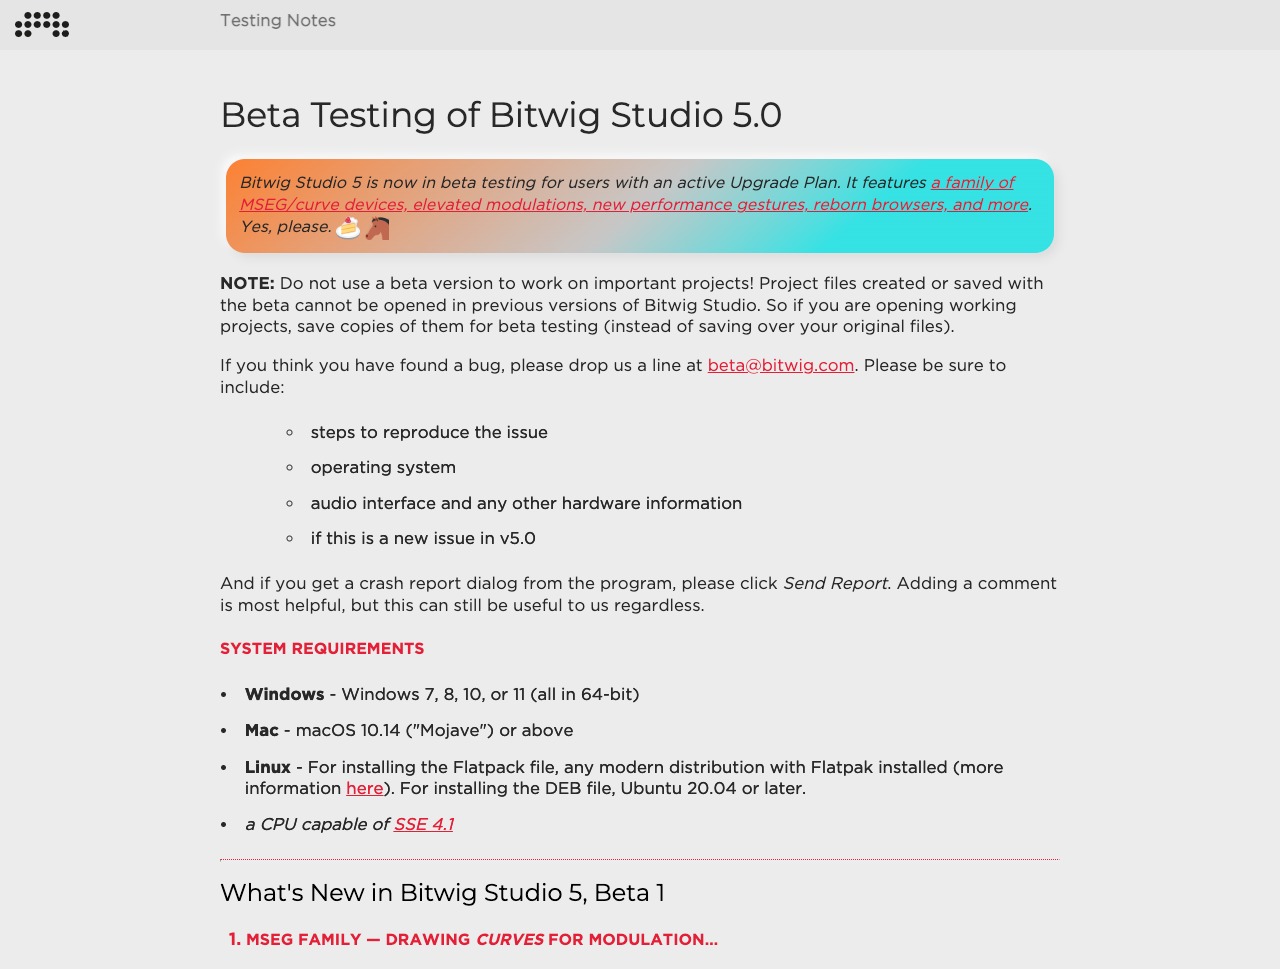 Testing Notes for Bitwig Studio 5